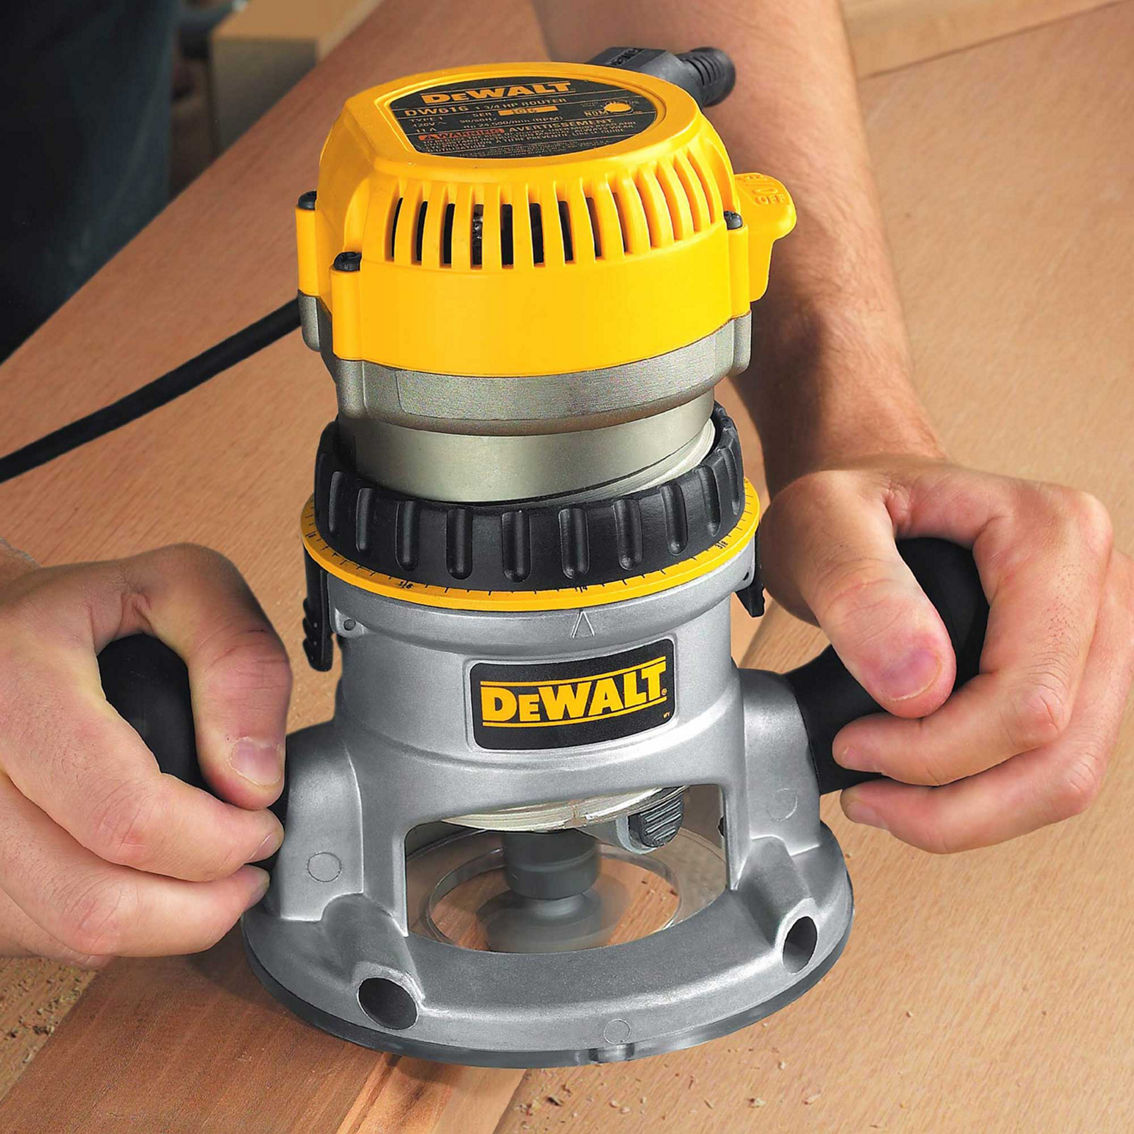 DeWalt 2-1/4 HP (maximum motor HP) EVS Fixed Base Router with Soft Start - Image 2 of 10